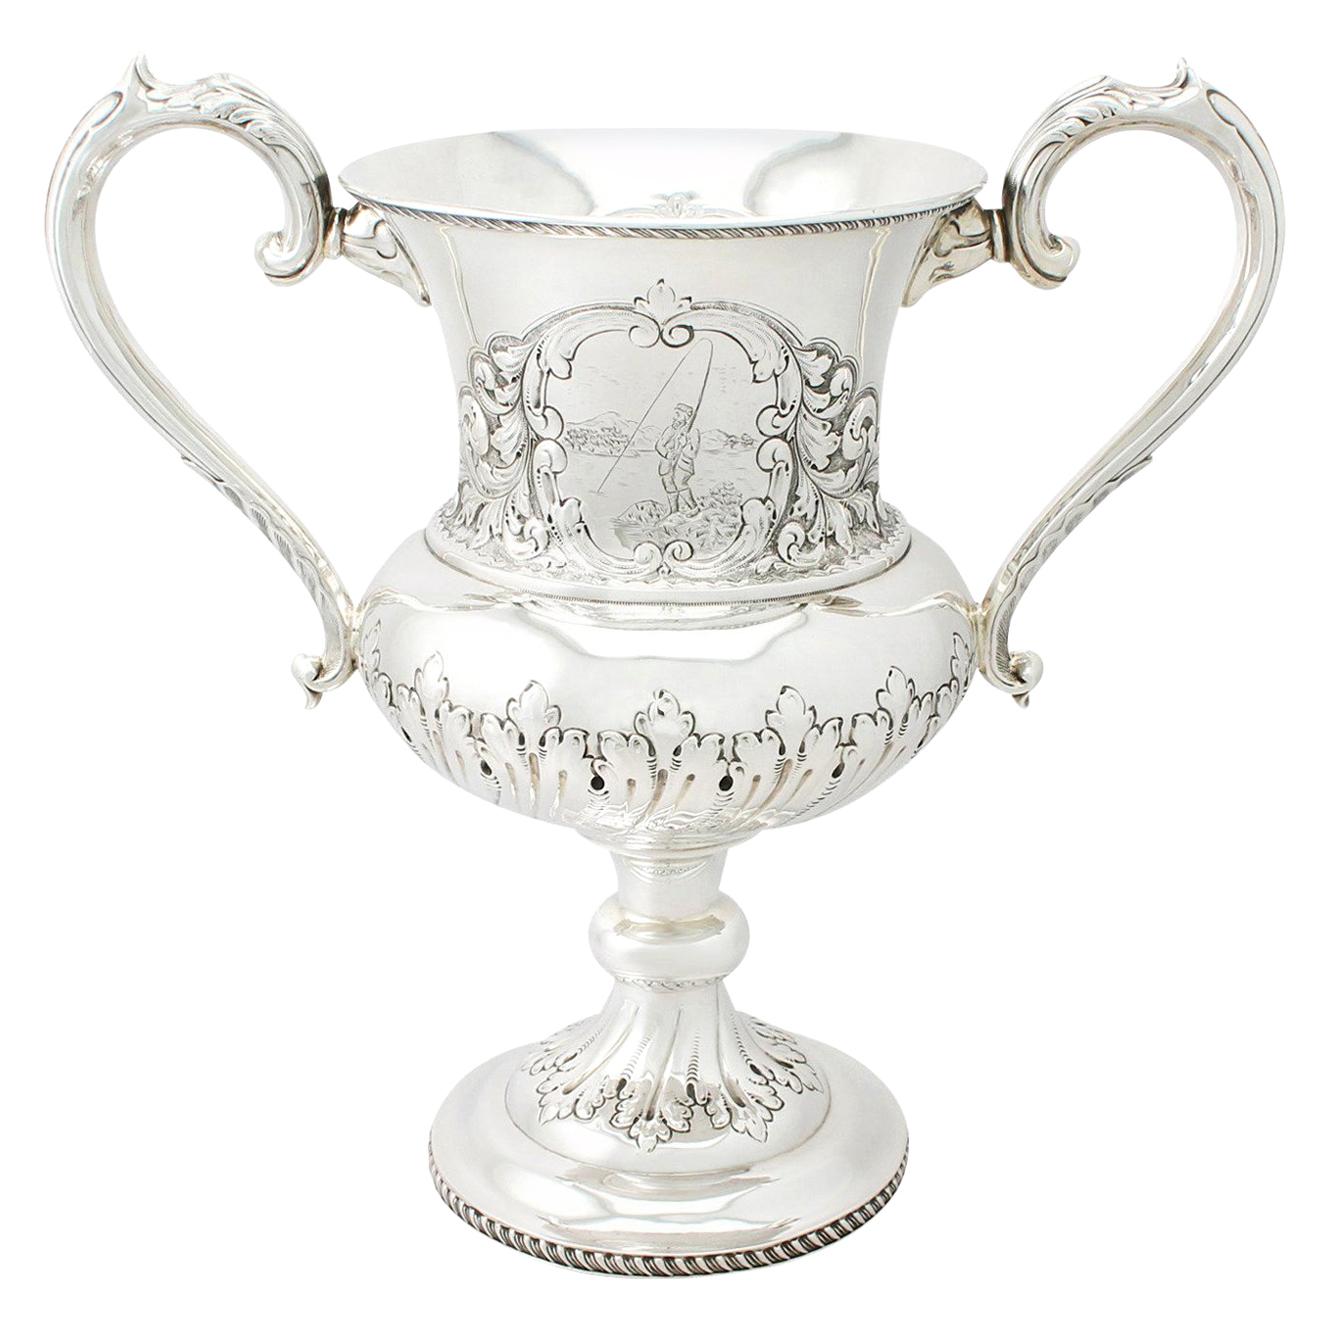 Antique Edwardian Sterling Silver Presentation Cup by Charles Harrold & Co